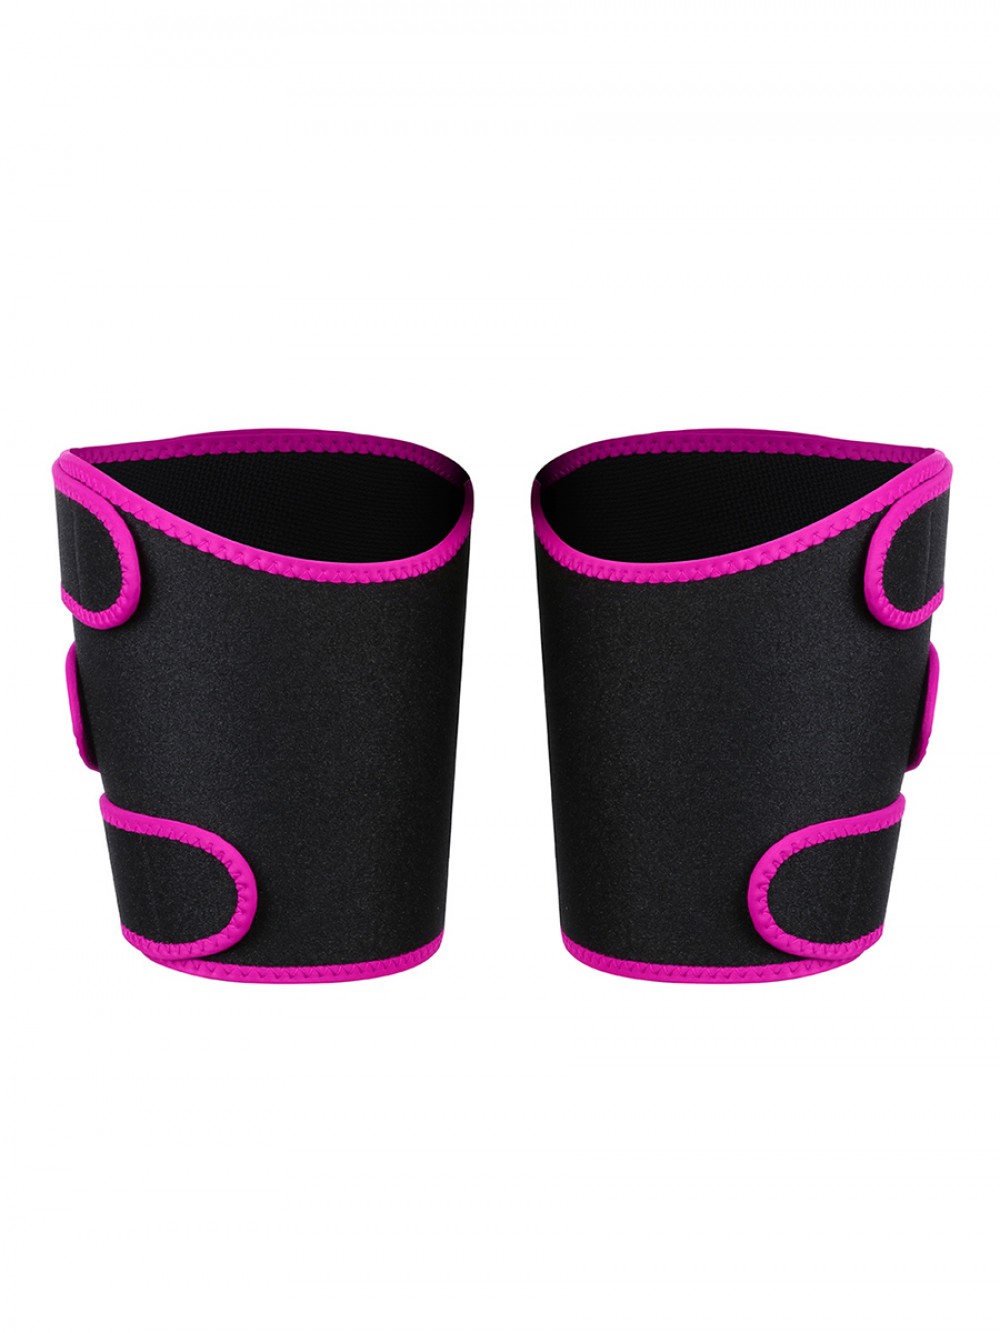 Sophisticated Rose Red Neoprene 2 Pcs Thigh Trimmers Adjust Bandage